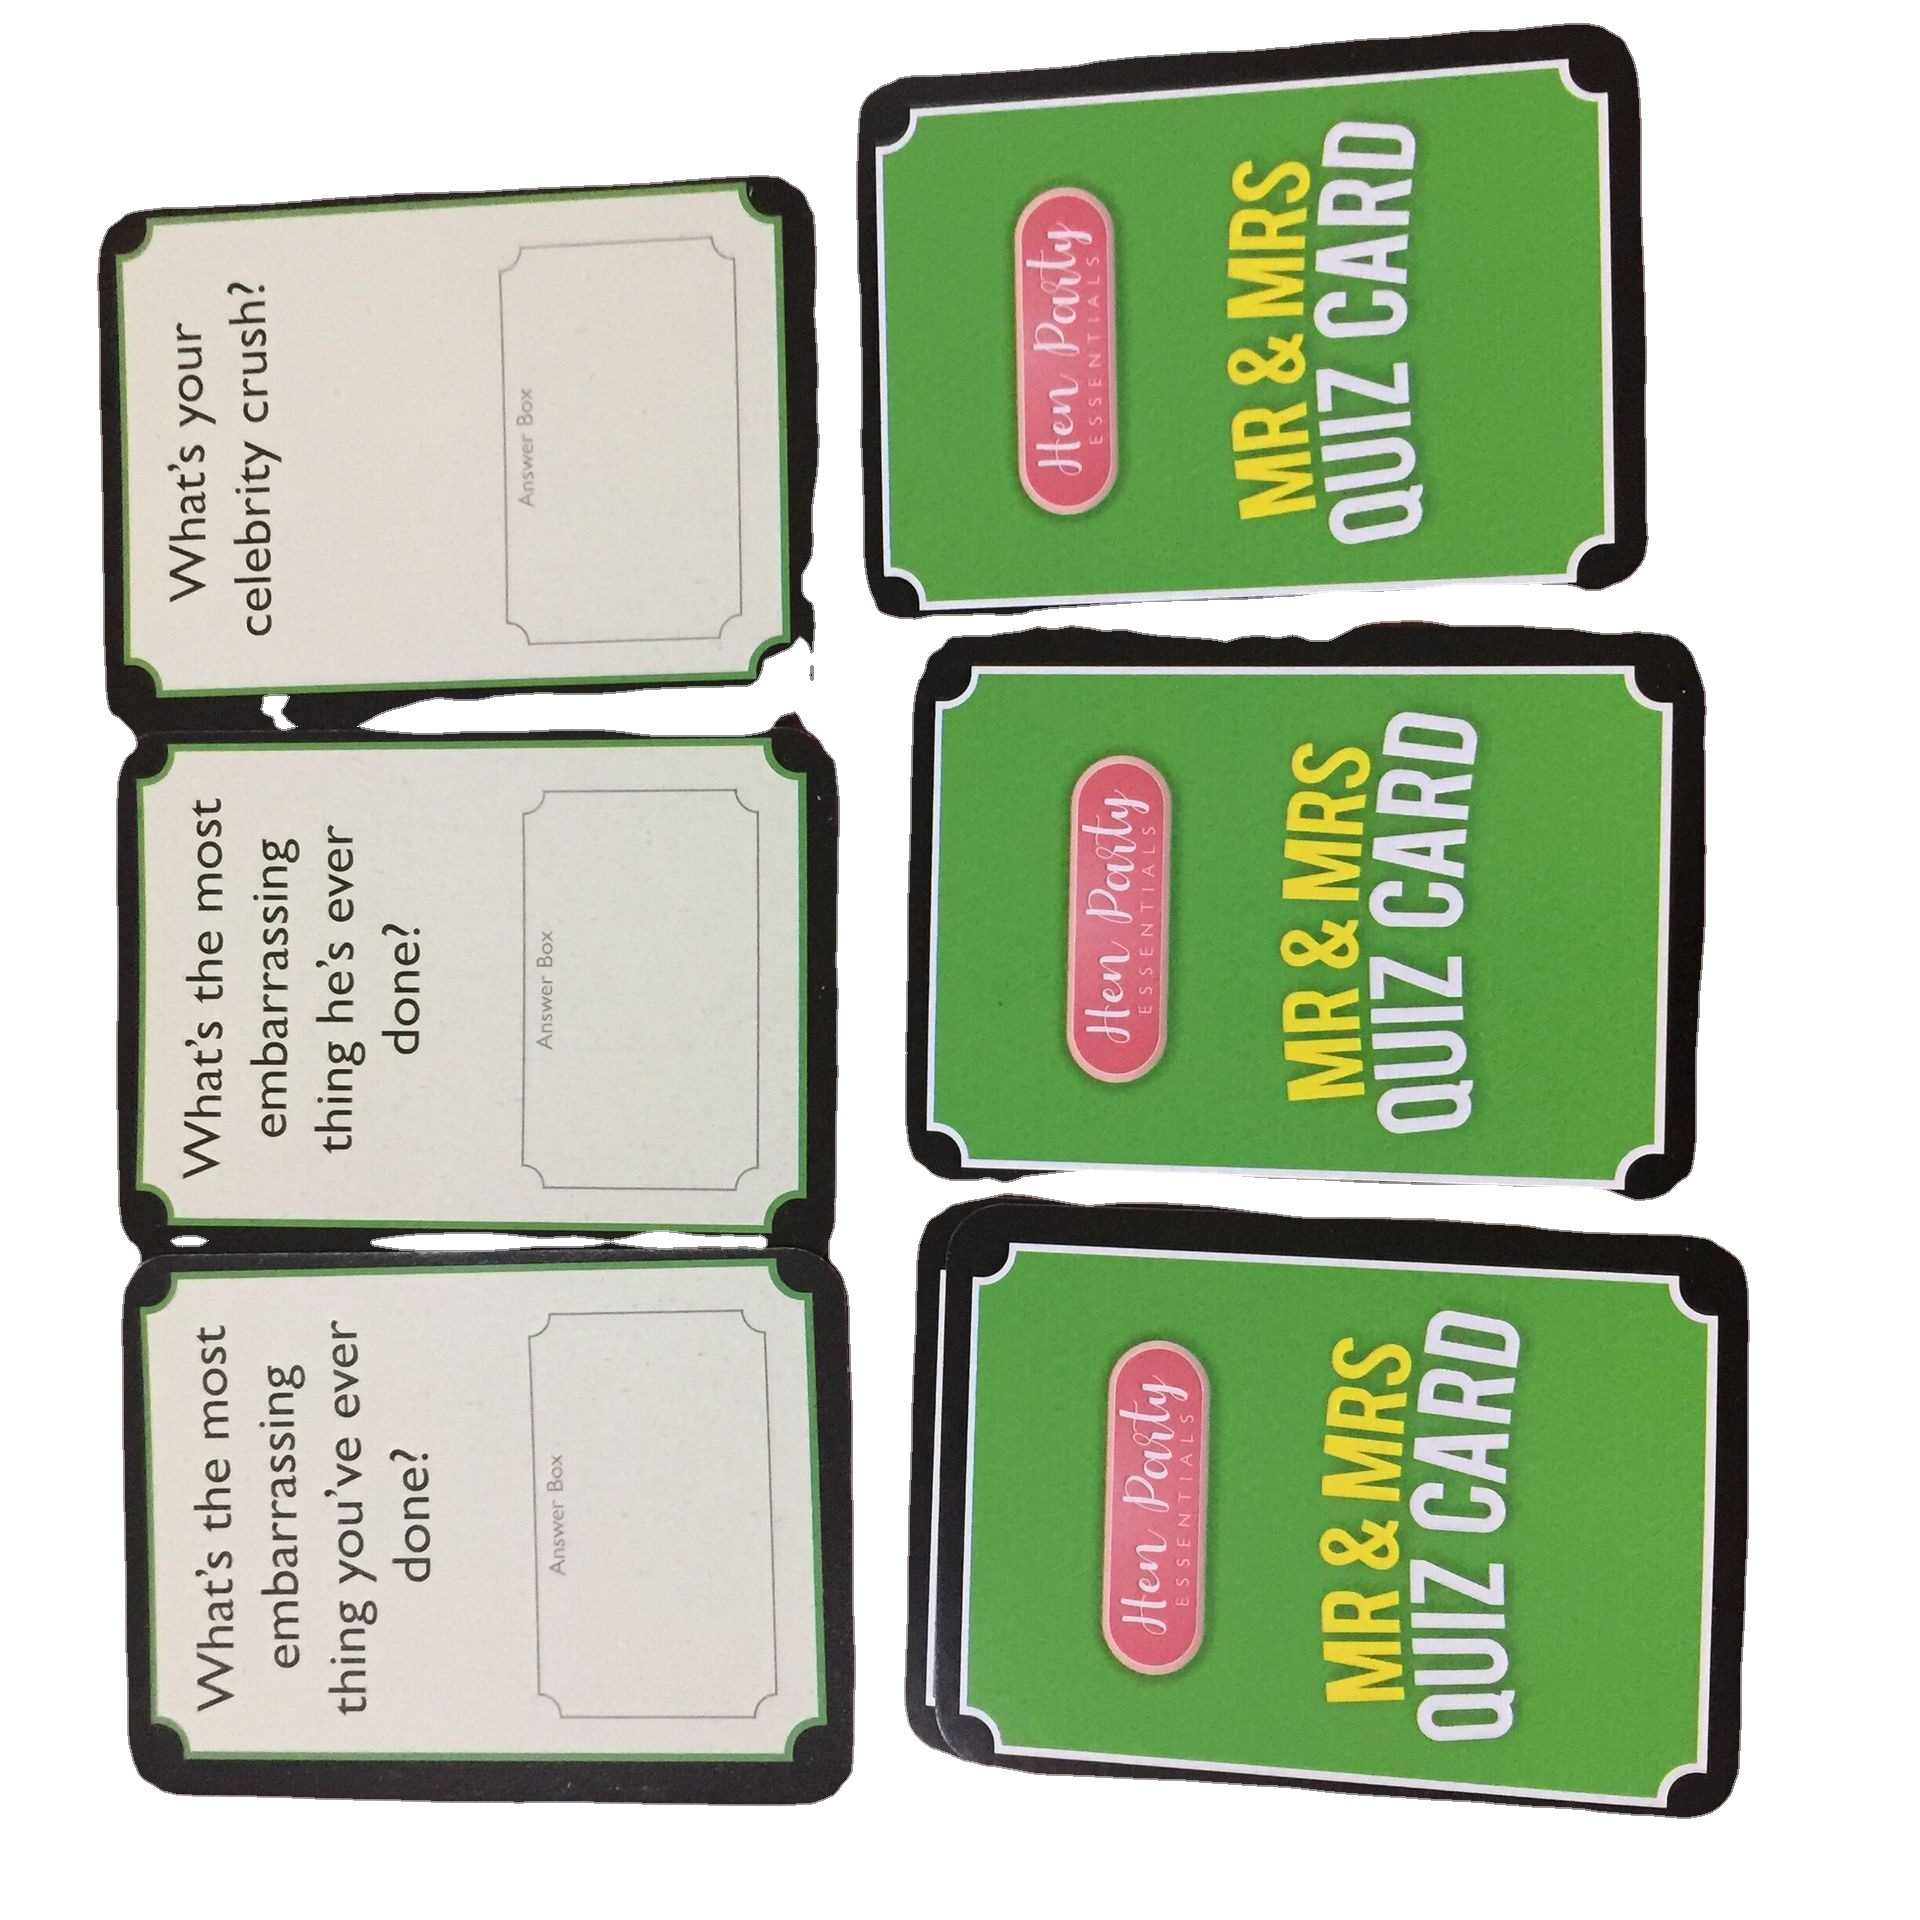 Manufacturers Supply Game Card, Bar Cards, Adventure Game Card, Courage Cards, Couple Cards